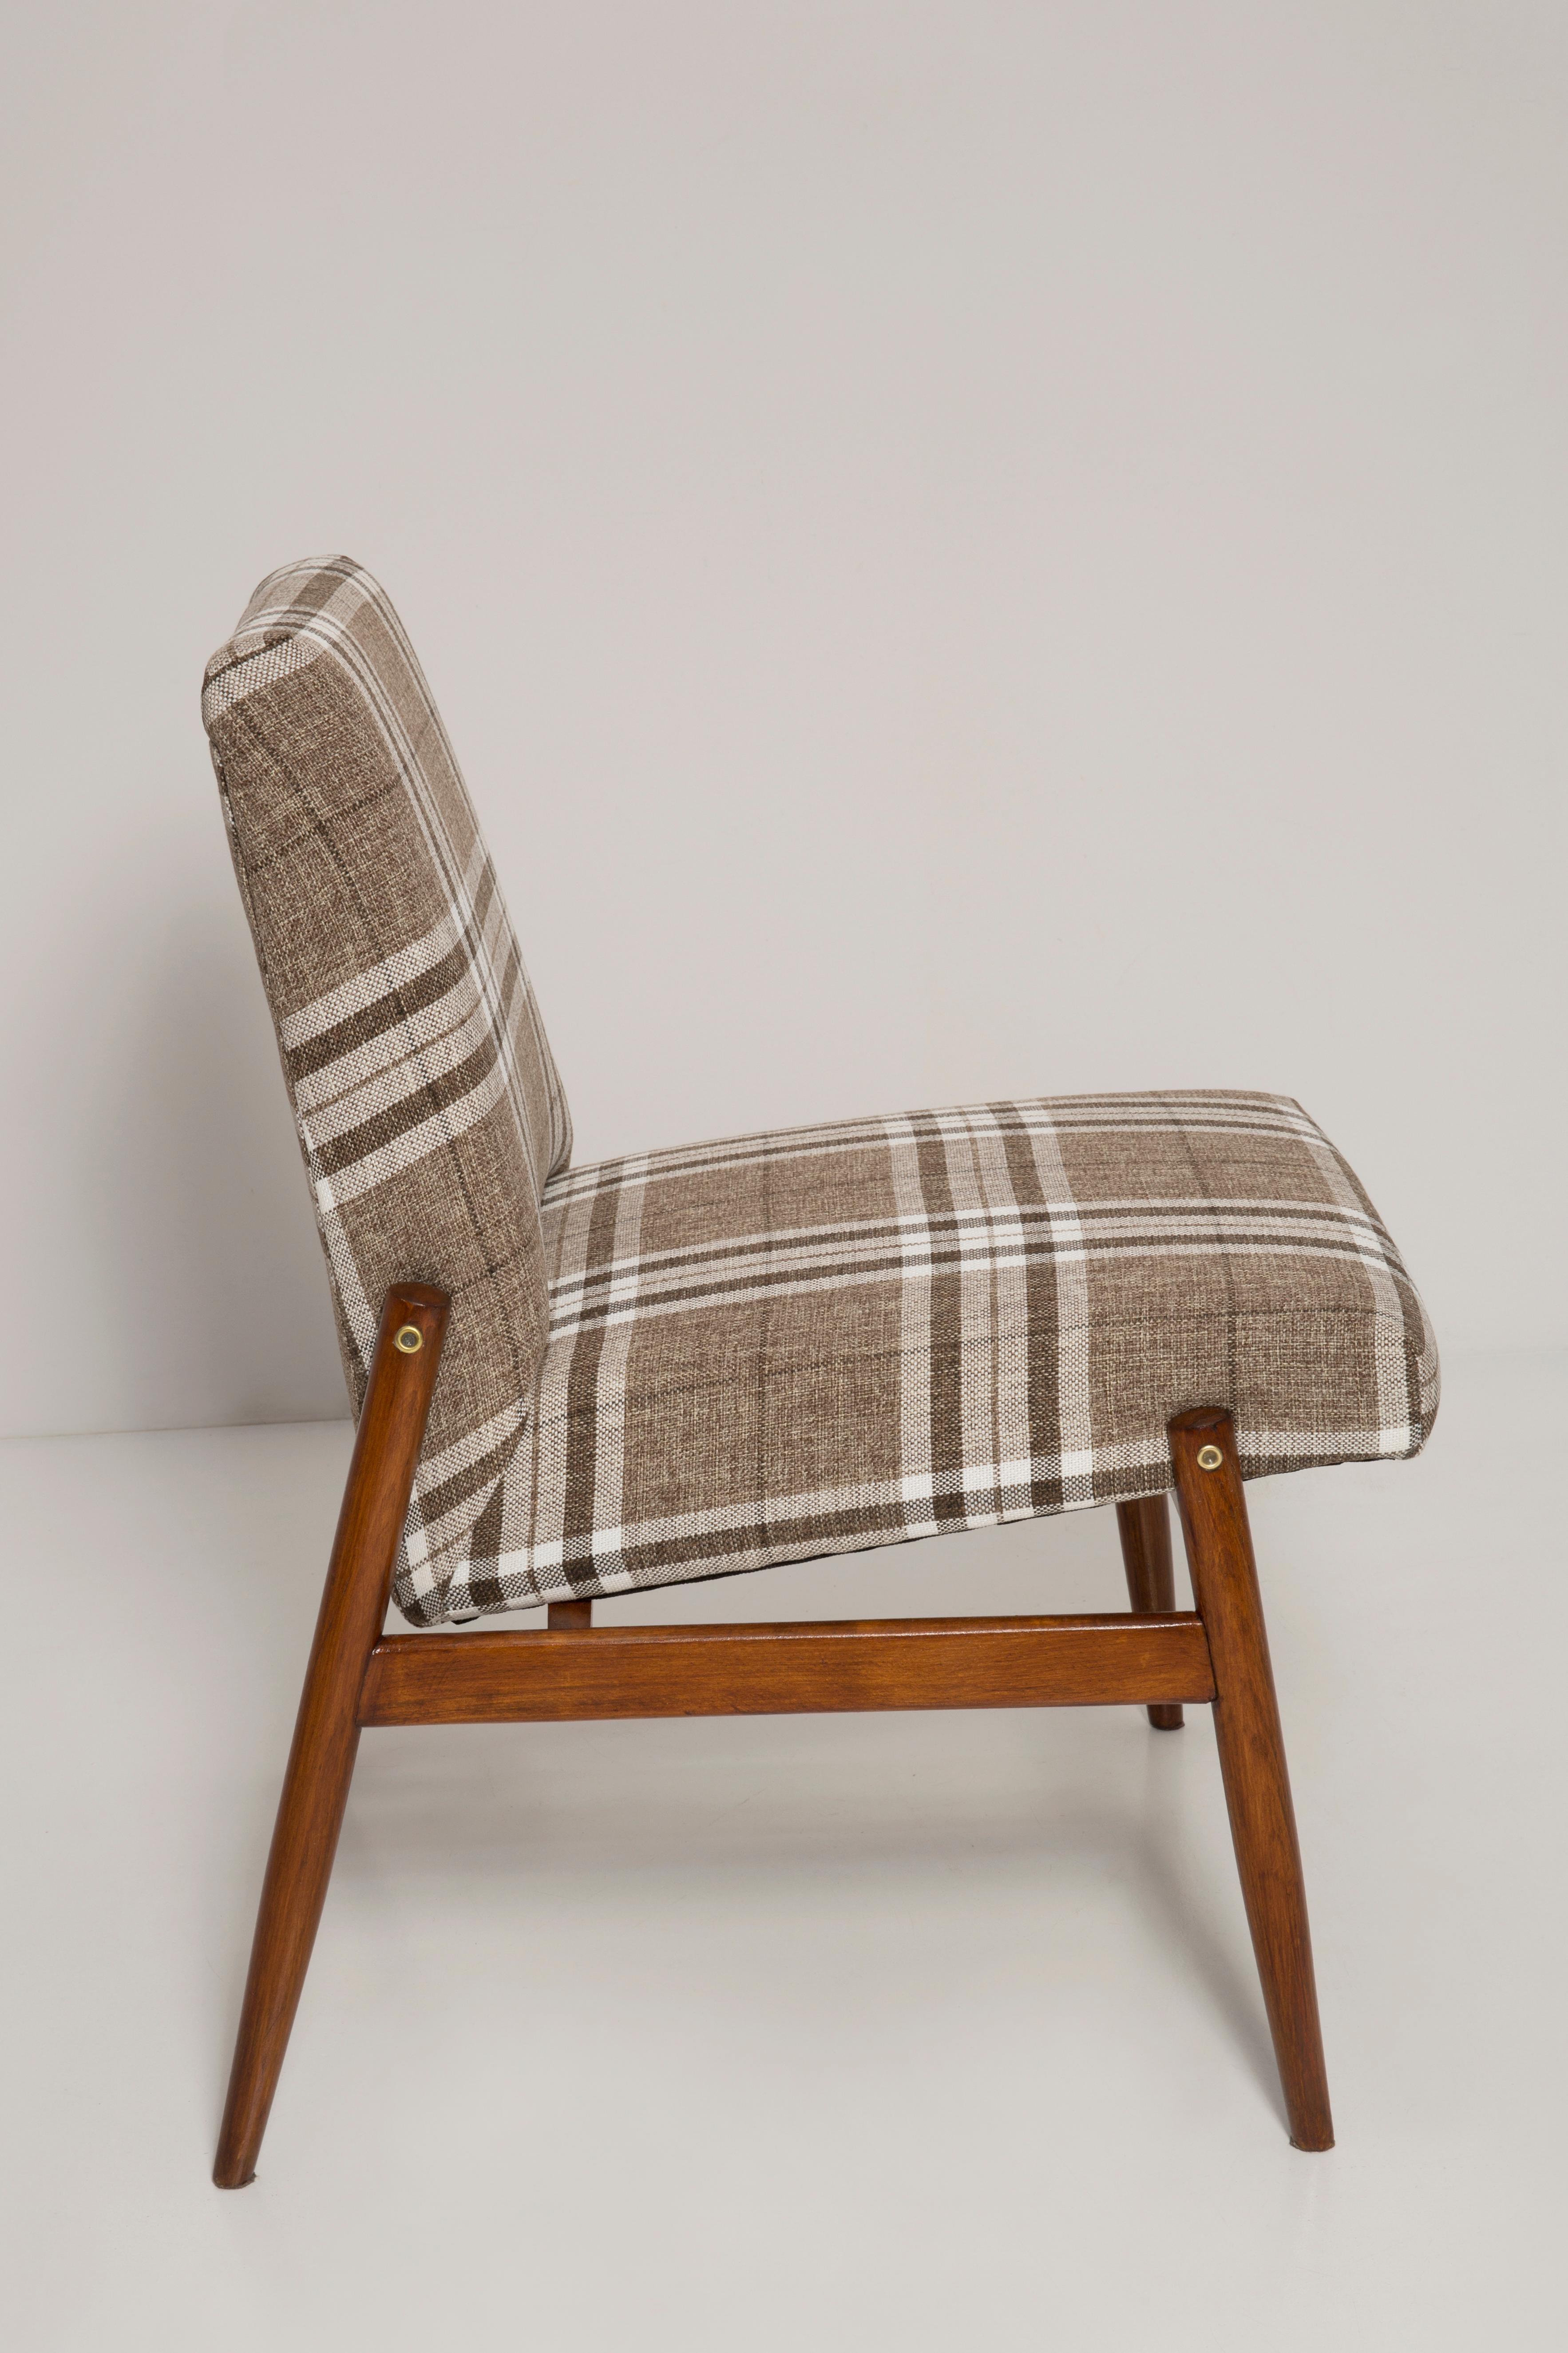 Polish Pair of Midcentury Beige Checkered Fabric Armchairs, Europe, 1960s For Sale